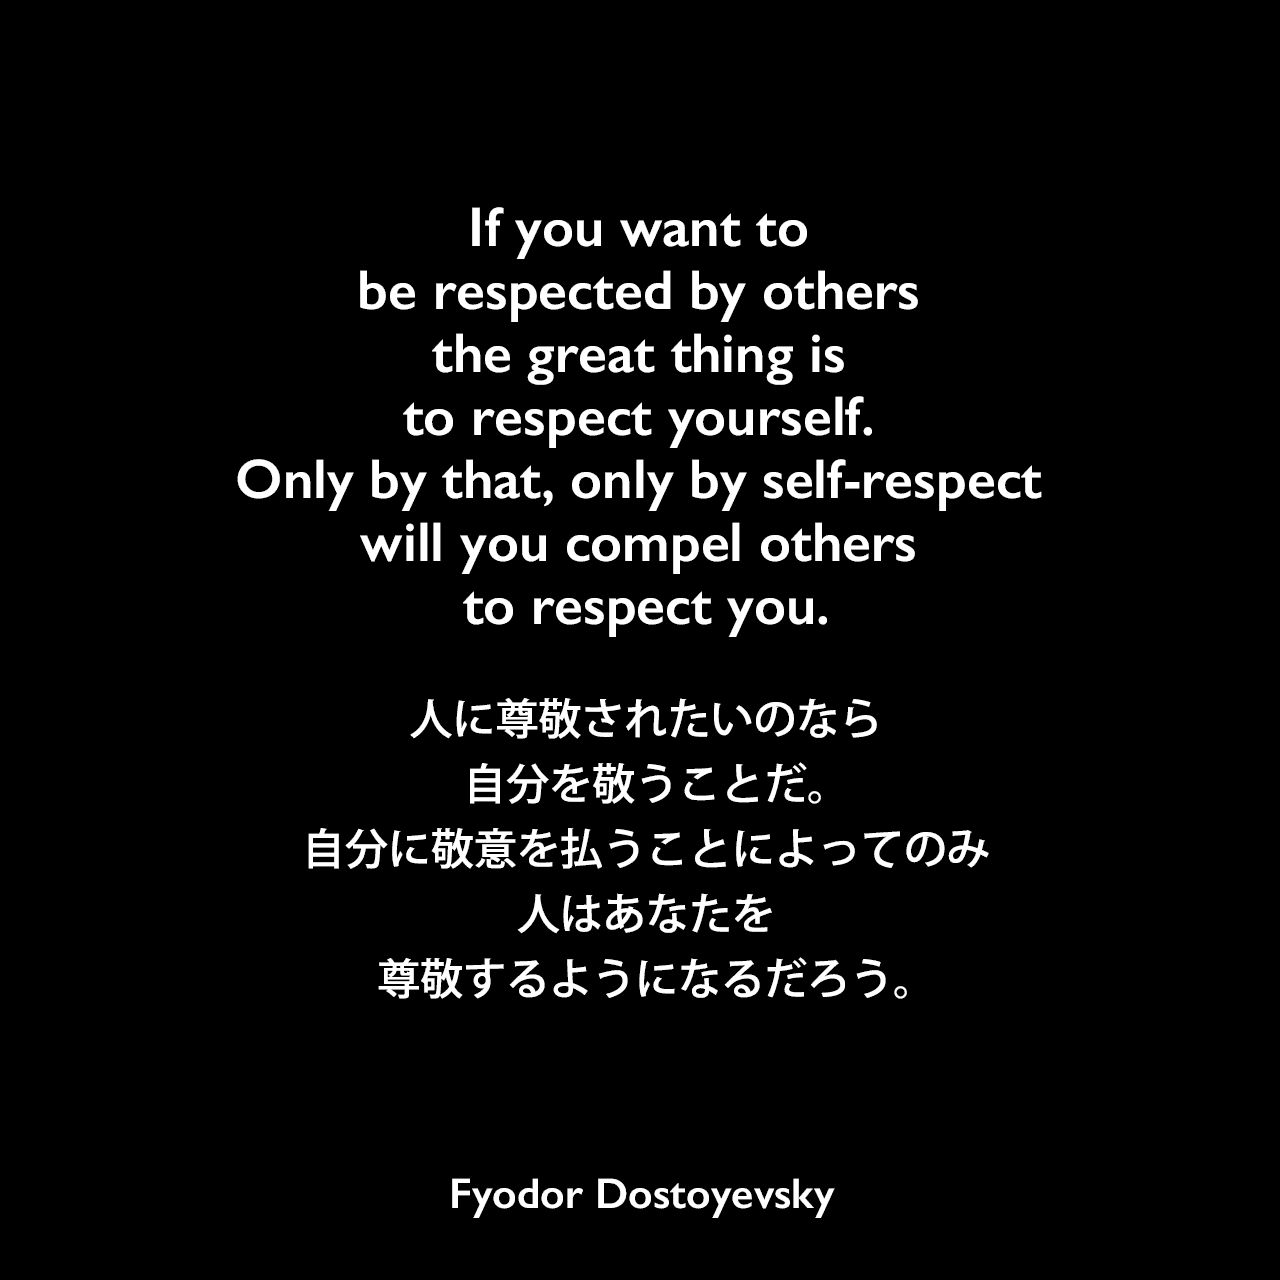 If you want to be respected by others the great thing is to respect yourself. Only by that, only by self-respect will you compel others to respect you.人に尊敬されたいのなら、自分を敬うことだ。自分に敬意を払うことによってのみ、人はあなたを尊敬するようになるだろう。- ドストエフキーの小説「虐げられた人びと」よりFyodor Dostoyevsky